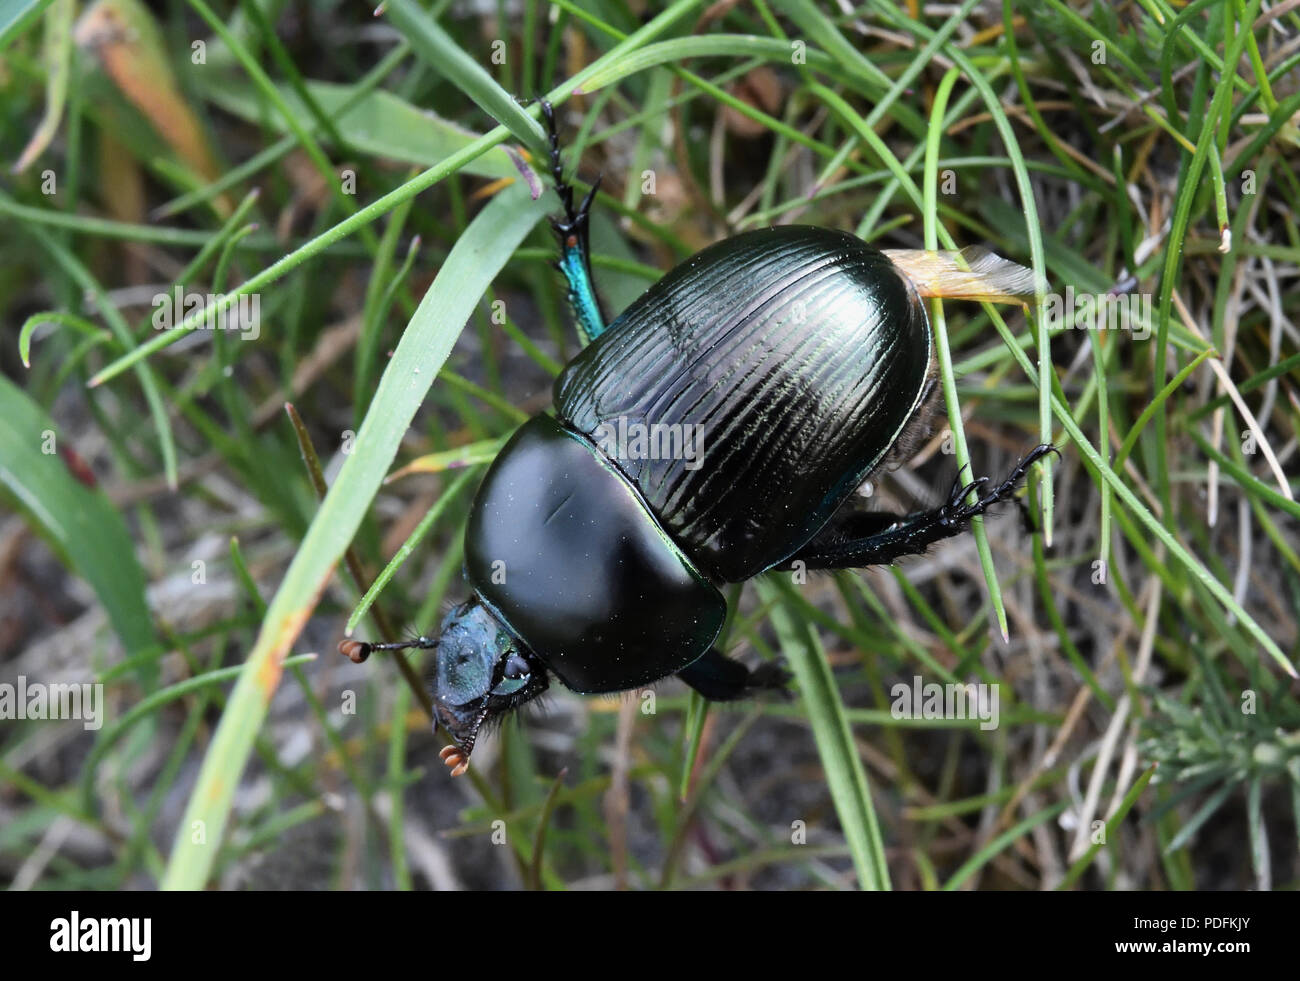 dor beetle;dung beetle;geotrupes stercorarius;north uist;scotland Stock Photo